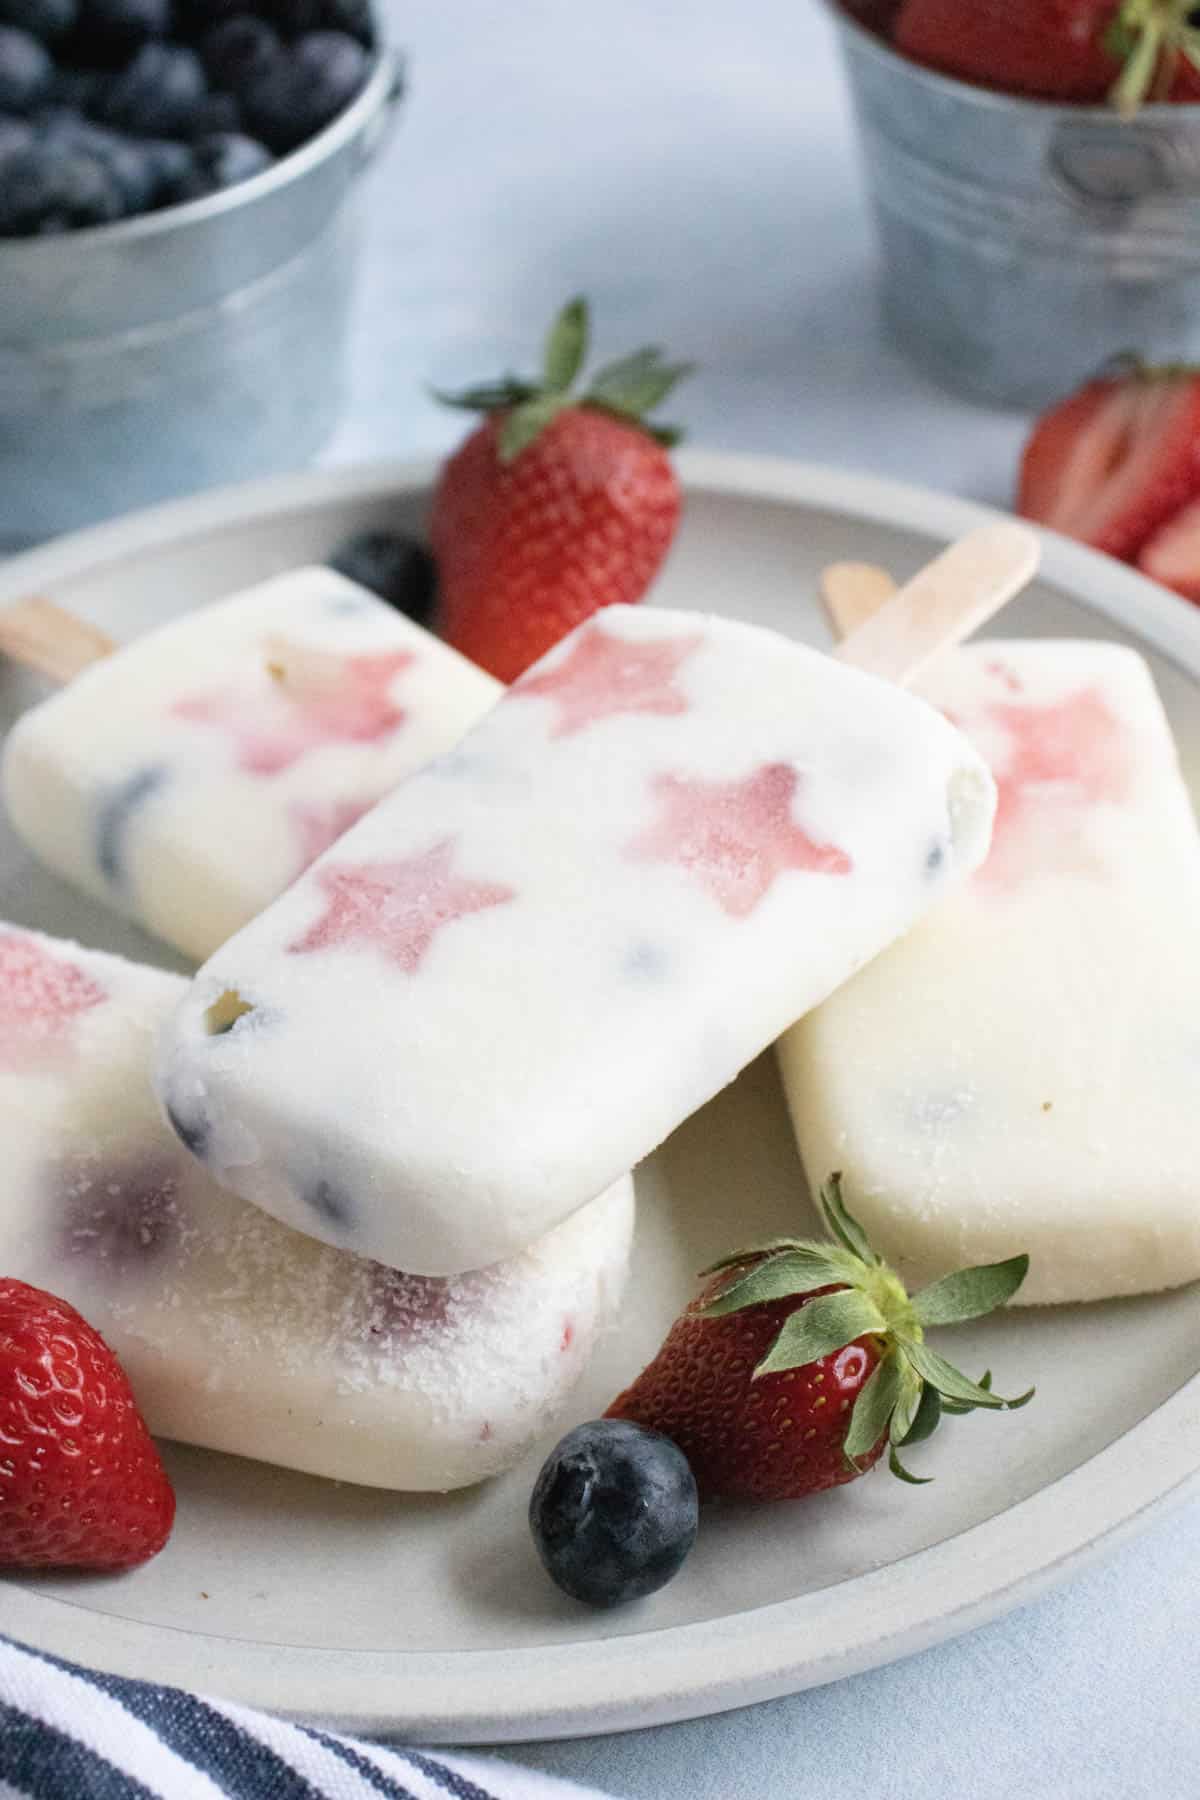 Yogurt popsicles with blueberries and strawberry stars.